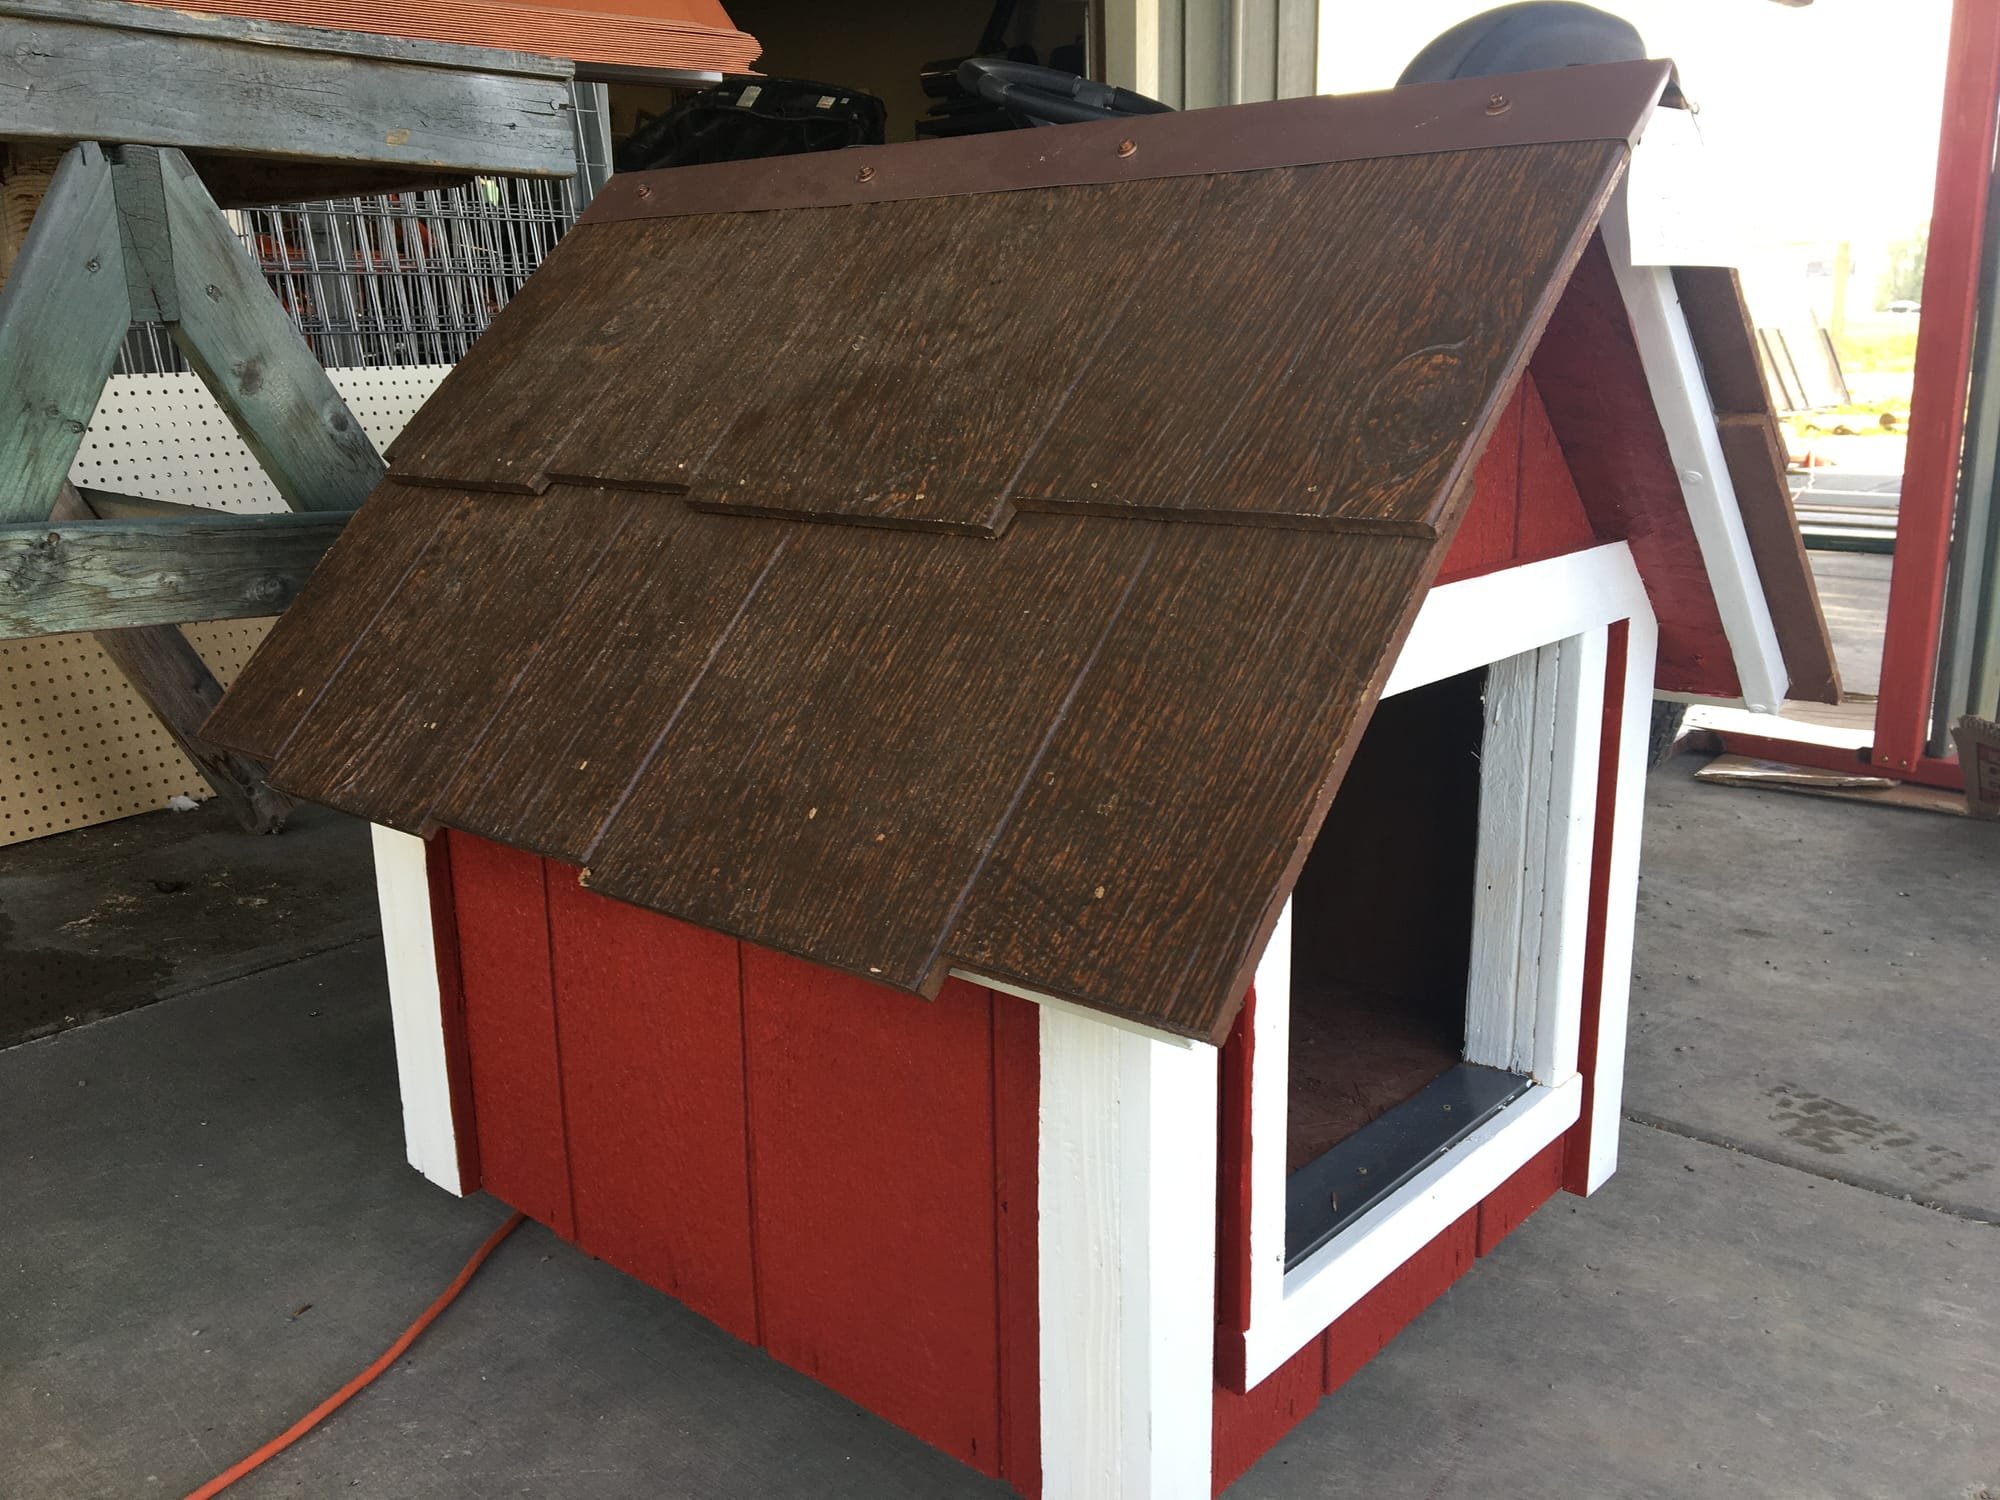 Donated dog houses from our local dog shelter, are being restored in our spare time. You can see it displayed in the farmers market picture. We are asking for $100.00 donation.